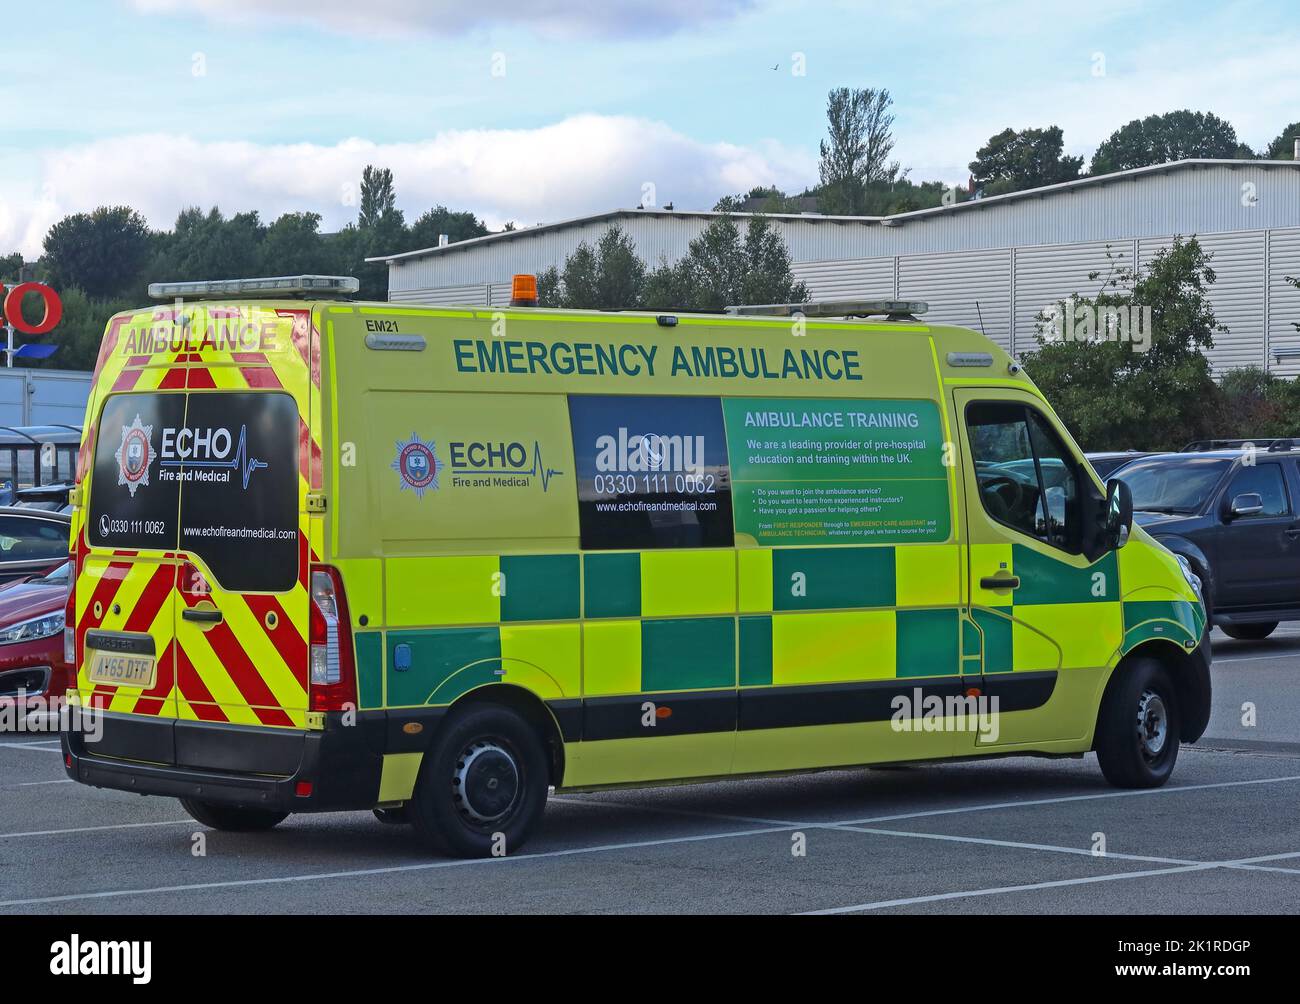 Echo, Fire and Medical, Emergency ambulance, parked in Glossop, High Peak, Derbyshire, England, UK, SK13 Stock Photo